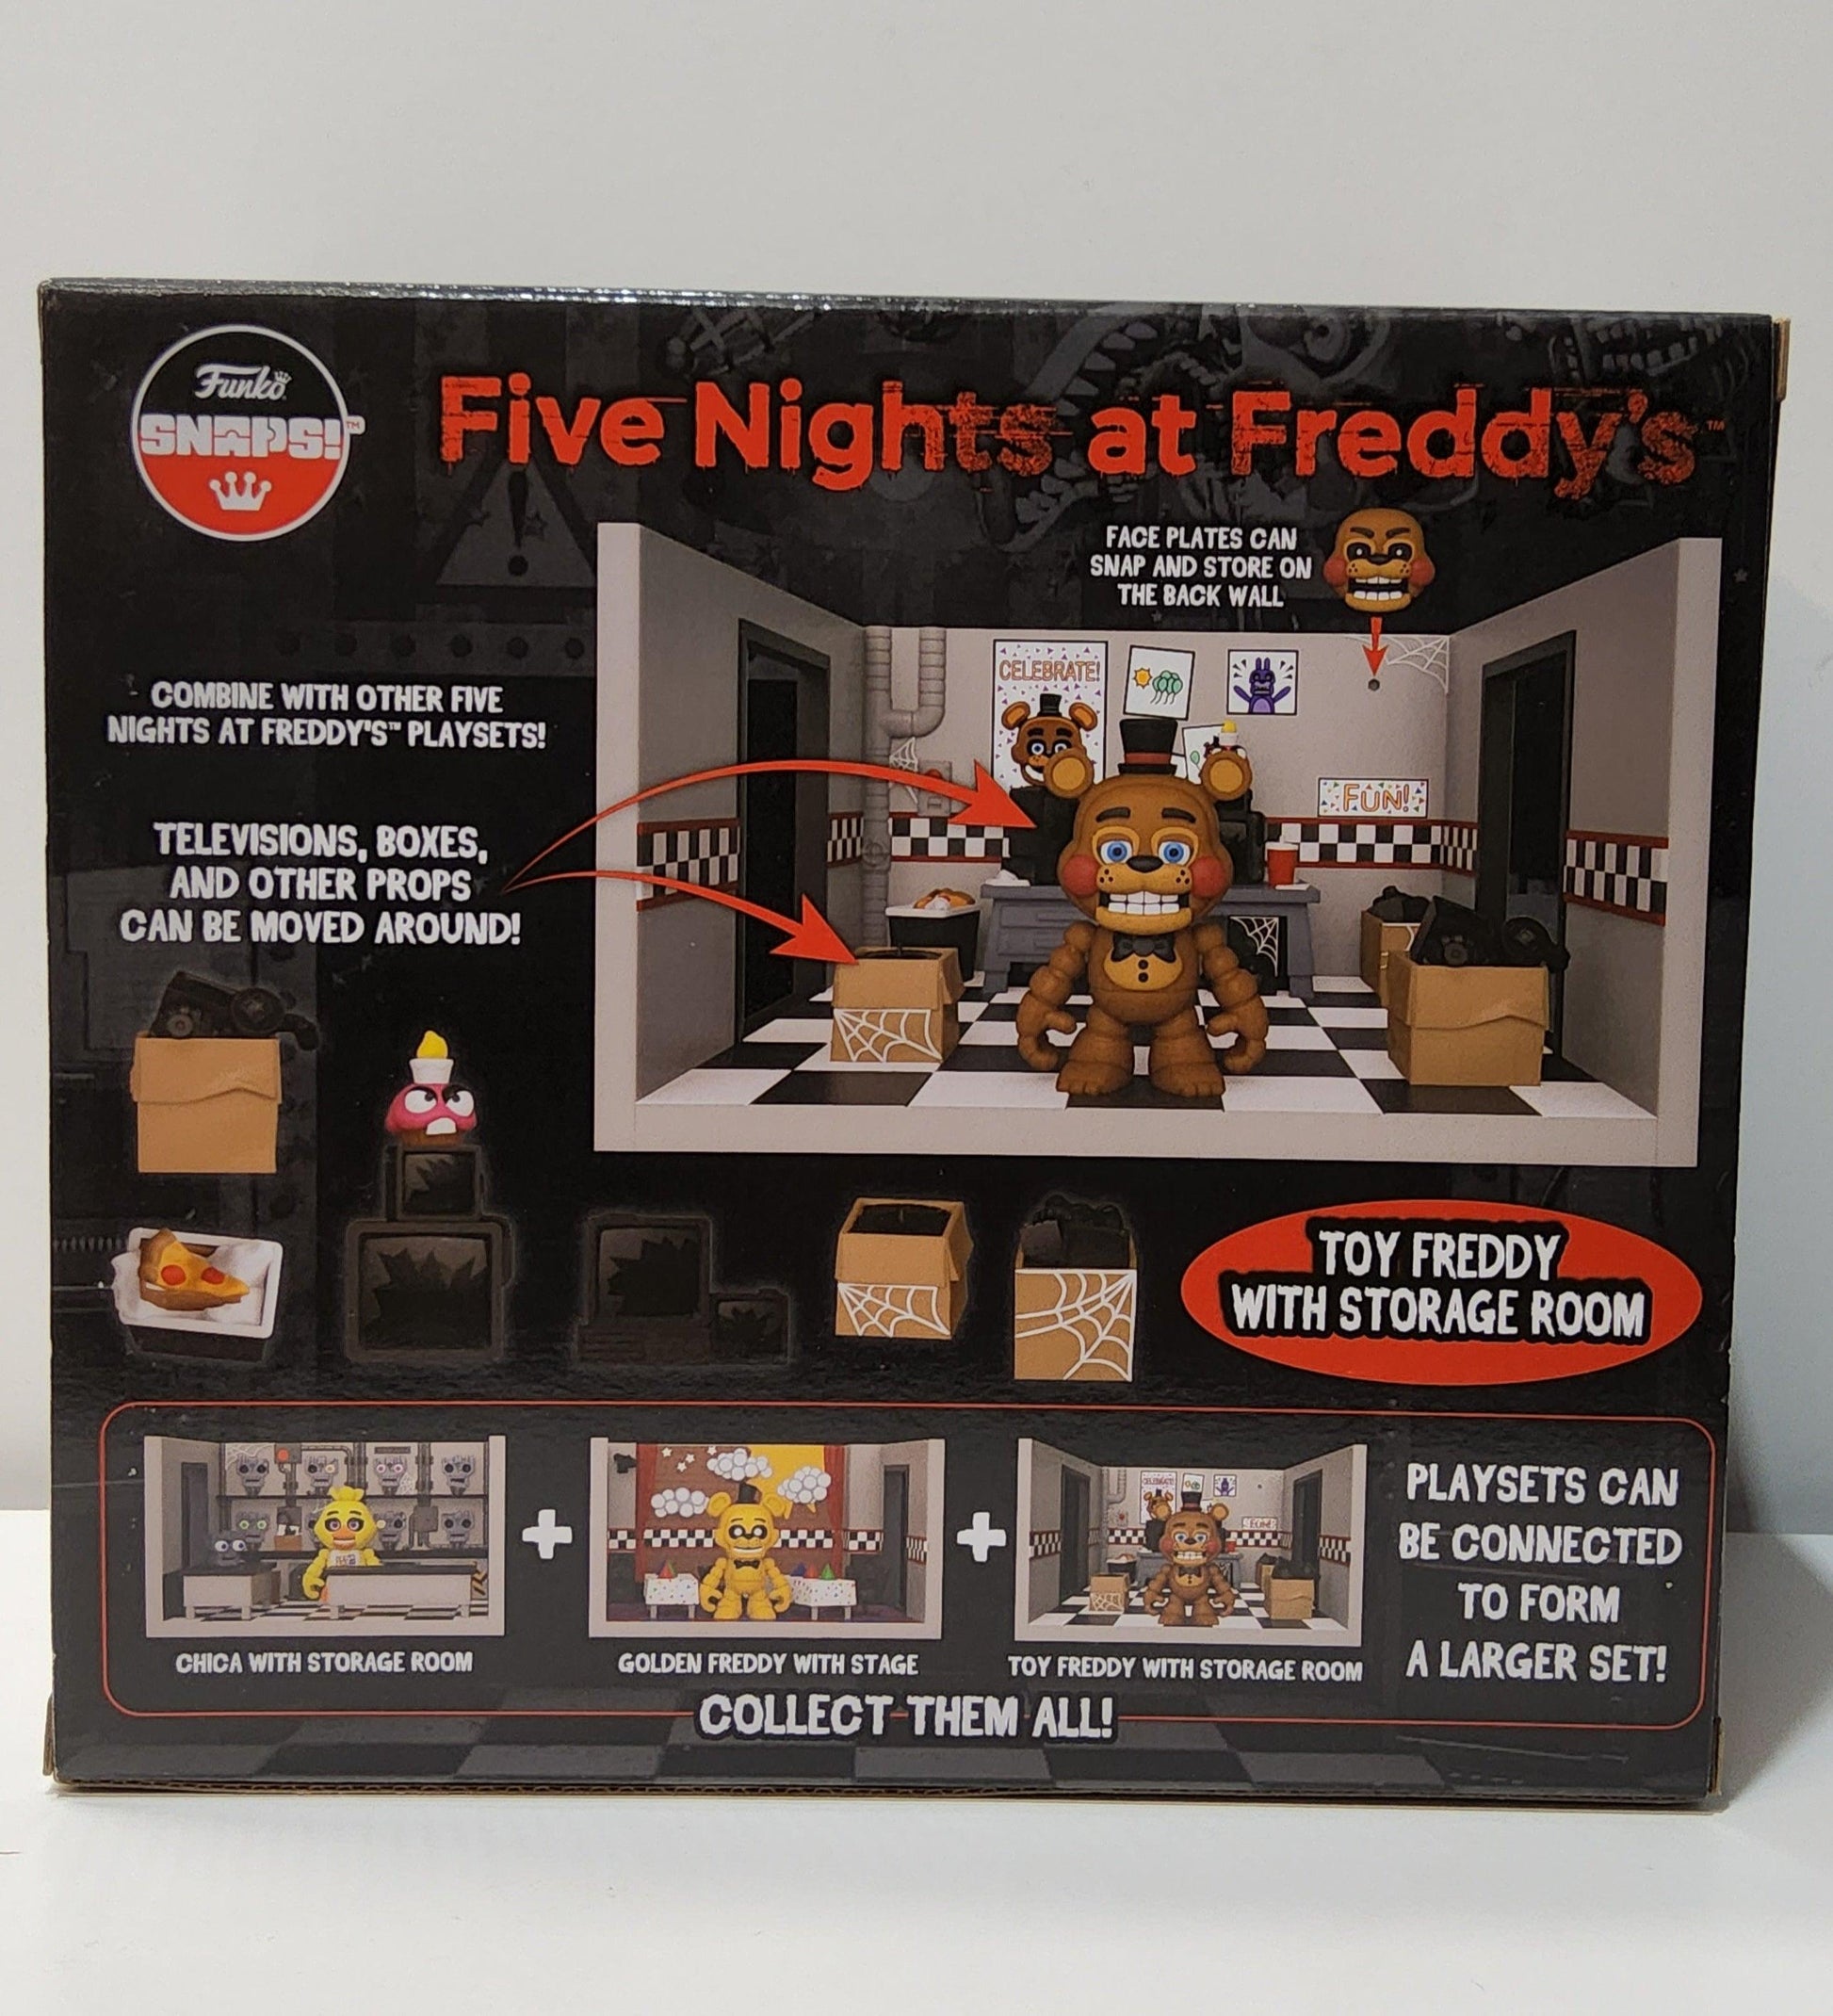 Funko Snap! Five Nights and Freddy's Security Room Playset